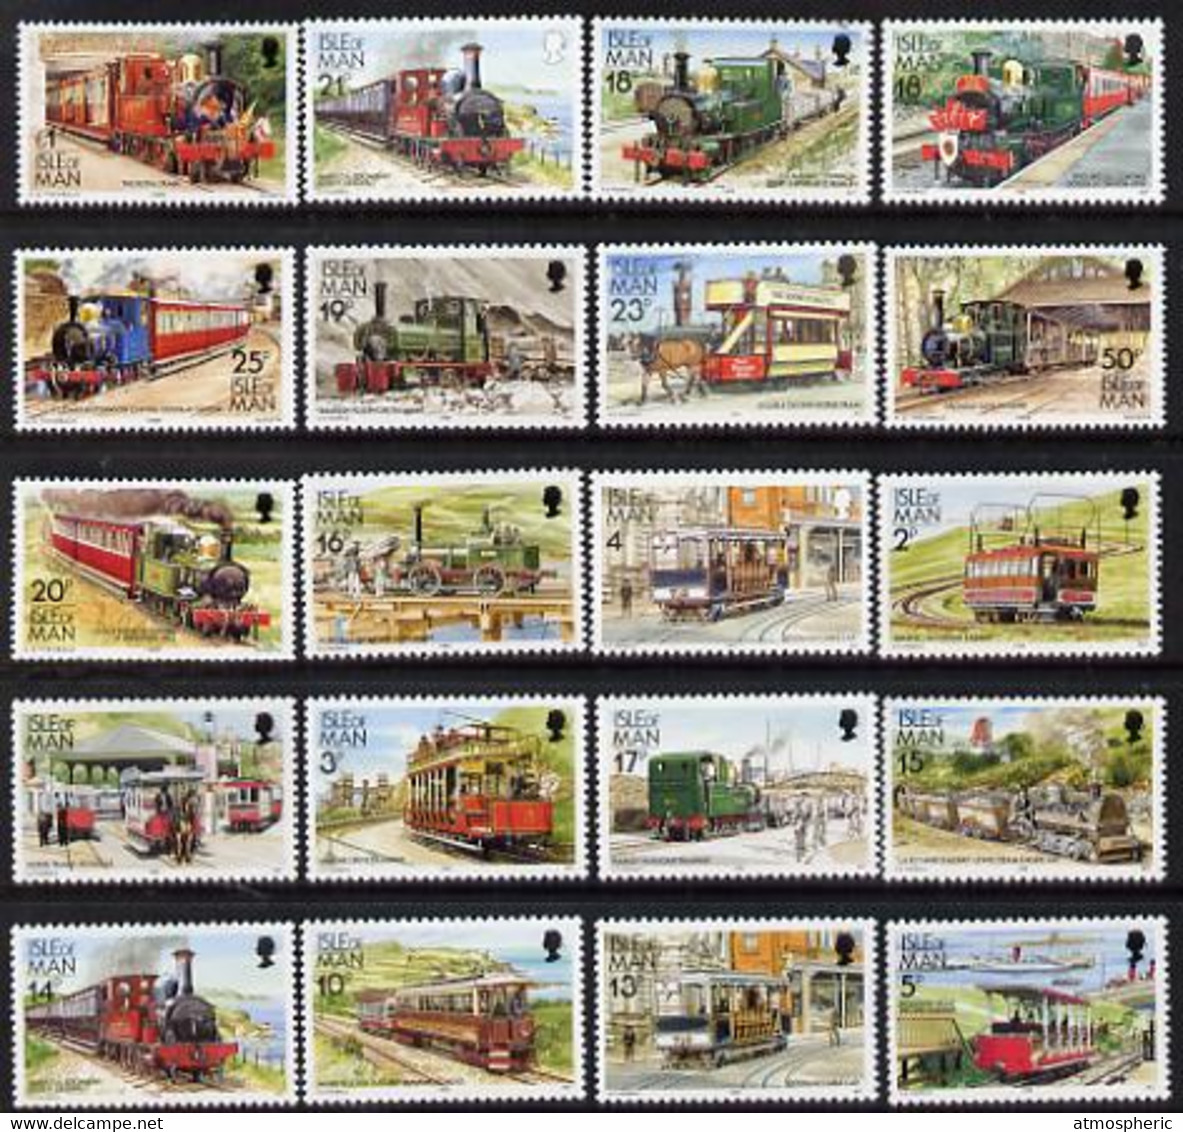 Isle Of Man 1988-92 Manx Railways & Tramways Complete Set Of 20 Values 1p To £1 U/M SG 365-80 - Unclassified